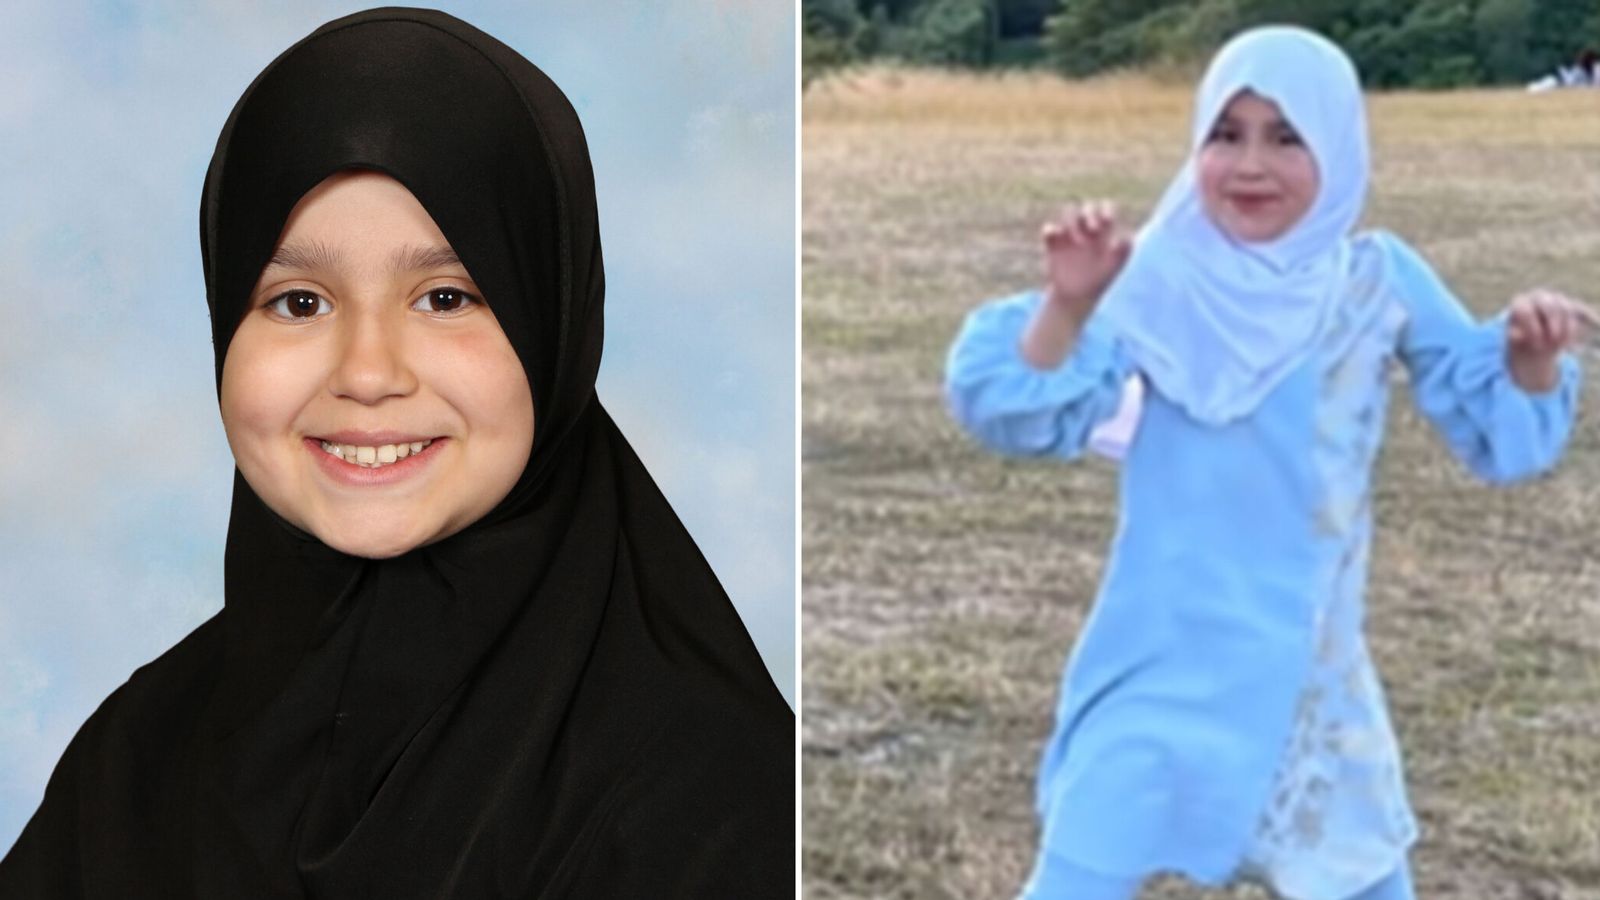 Sara Sharif: Police release new images in appeal for information into death of 10-year-old